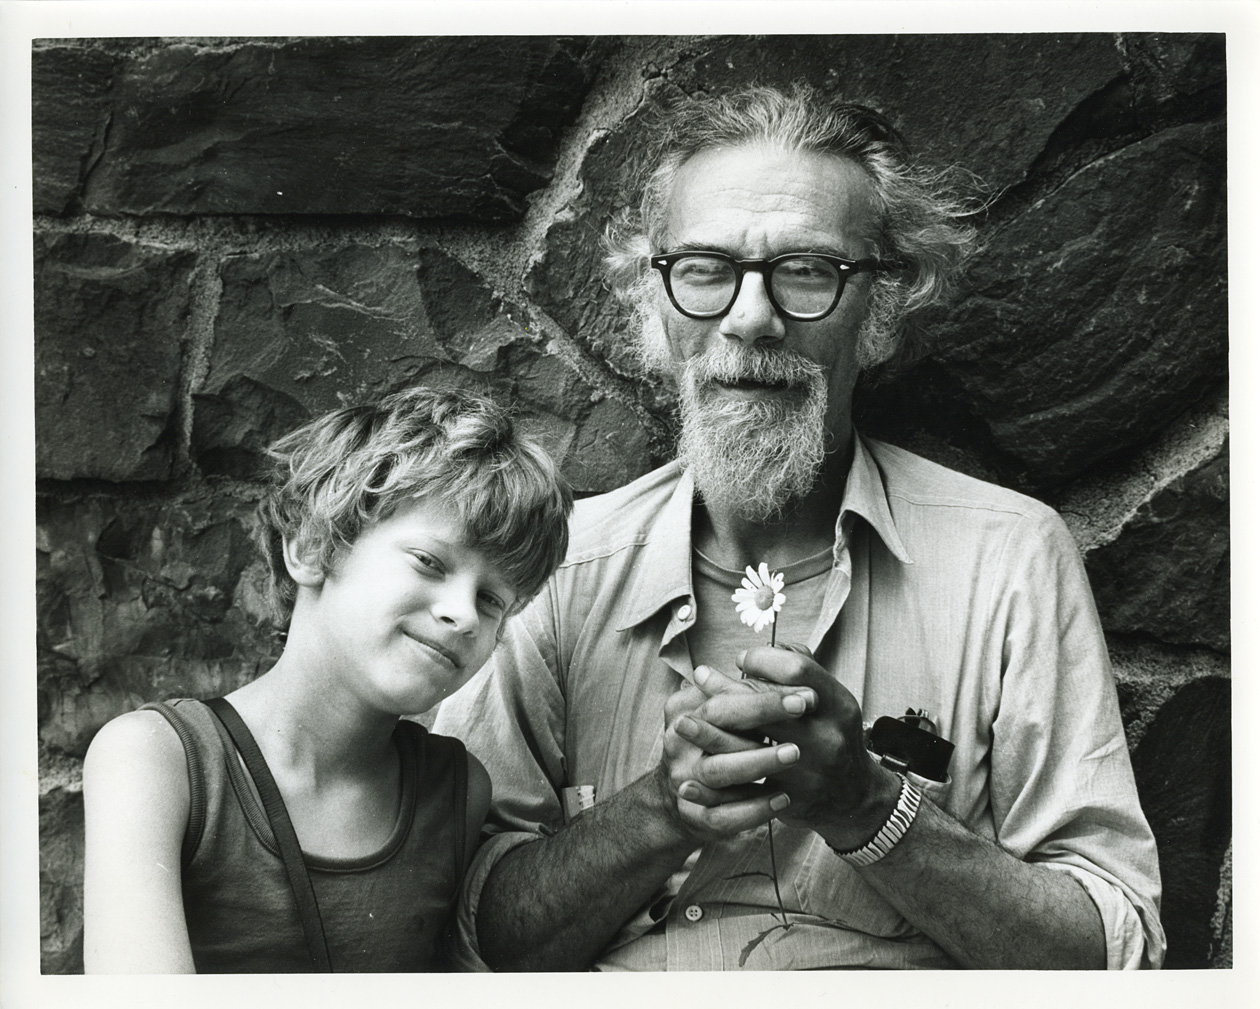 Portrait of Joel Oppenheimer and one of his sons in Albany, ca. late 1970s. Photograph by Don Byrd. From the Don Byrd Archive located at TK.